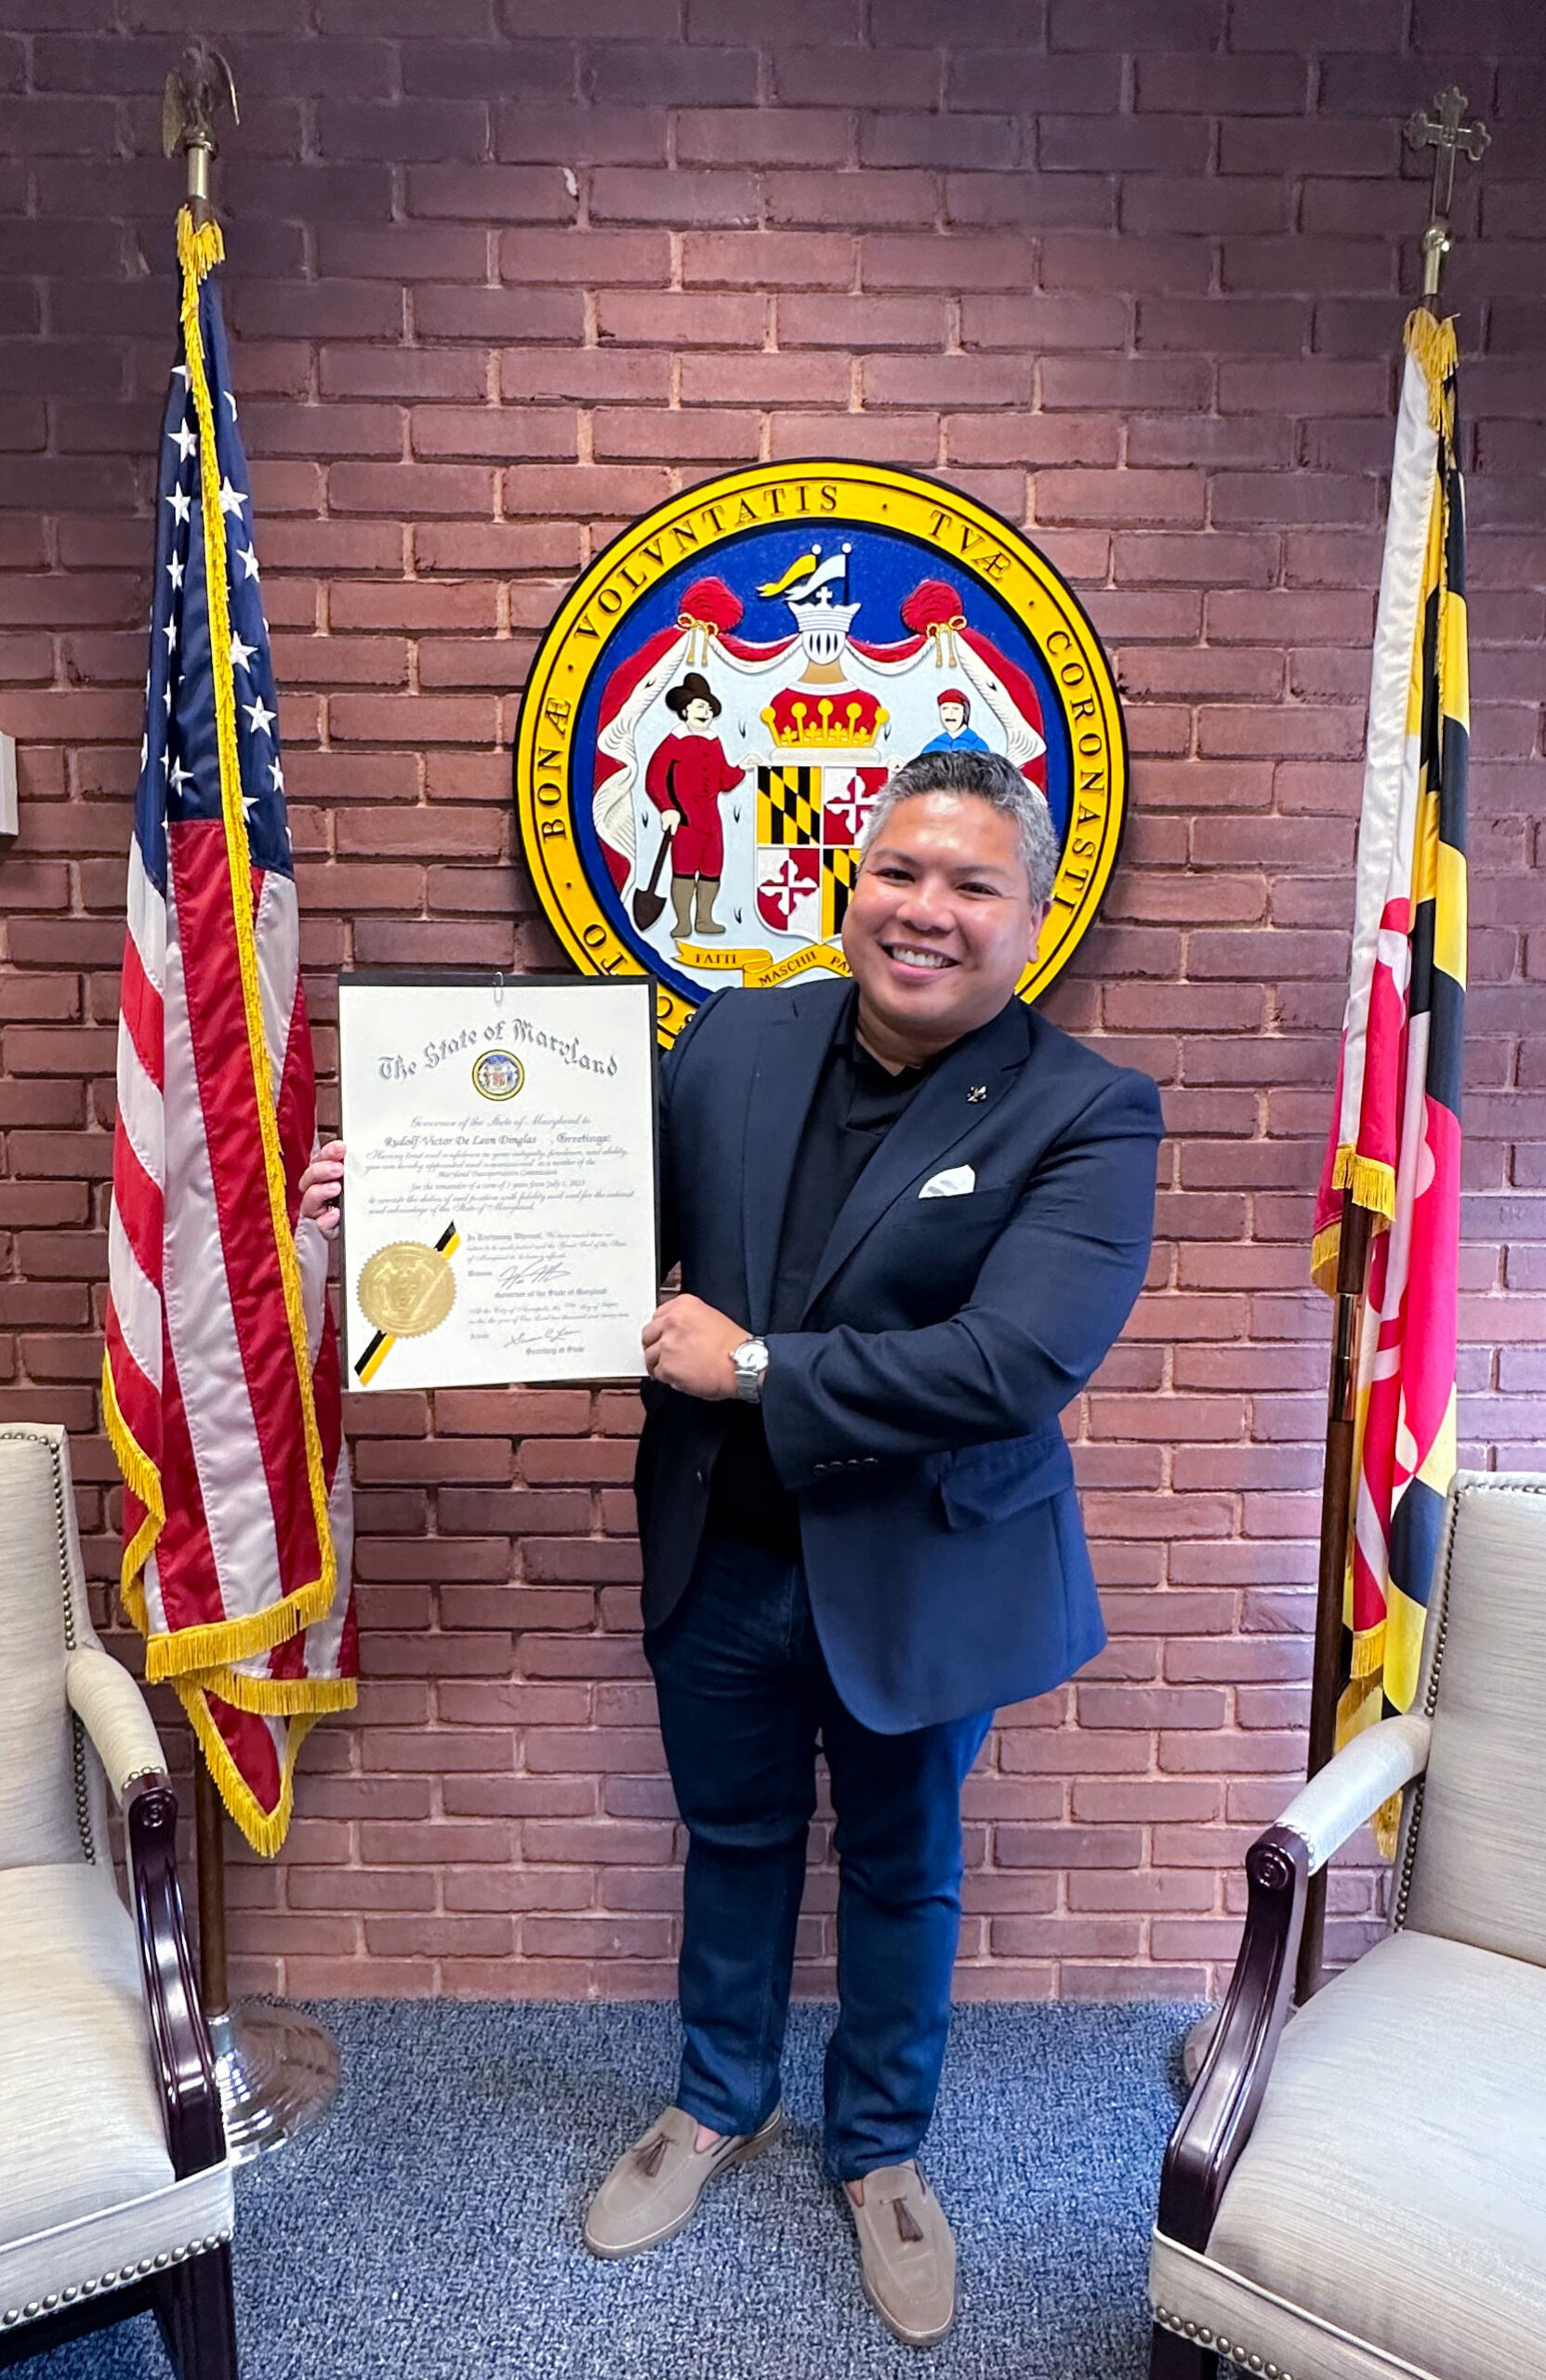 A person standing between the US flag and the Maryland flag holds up a certificate.